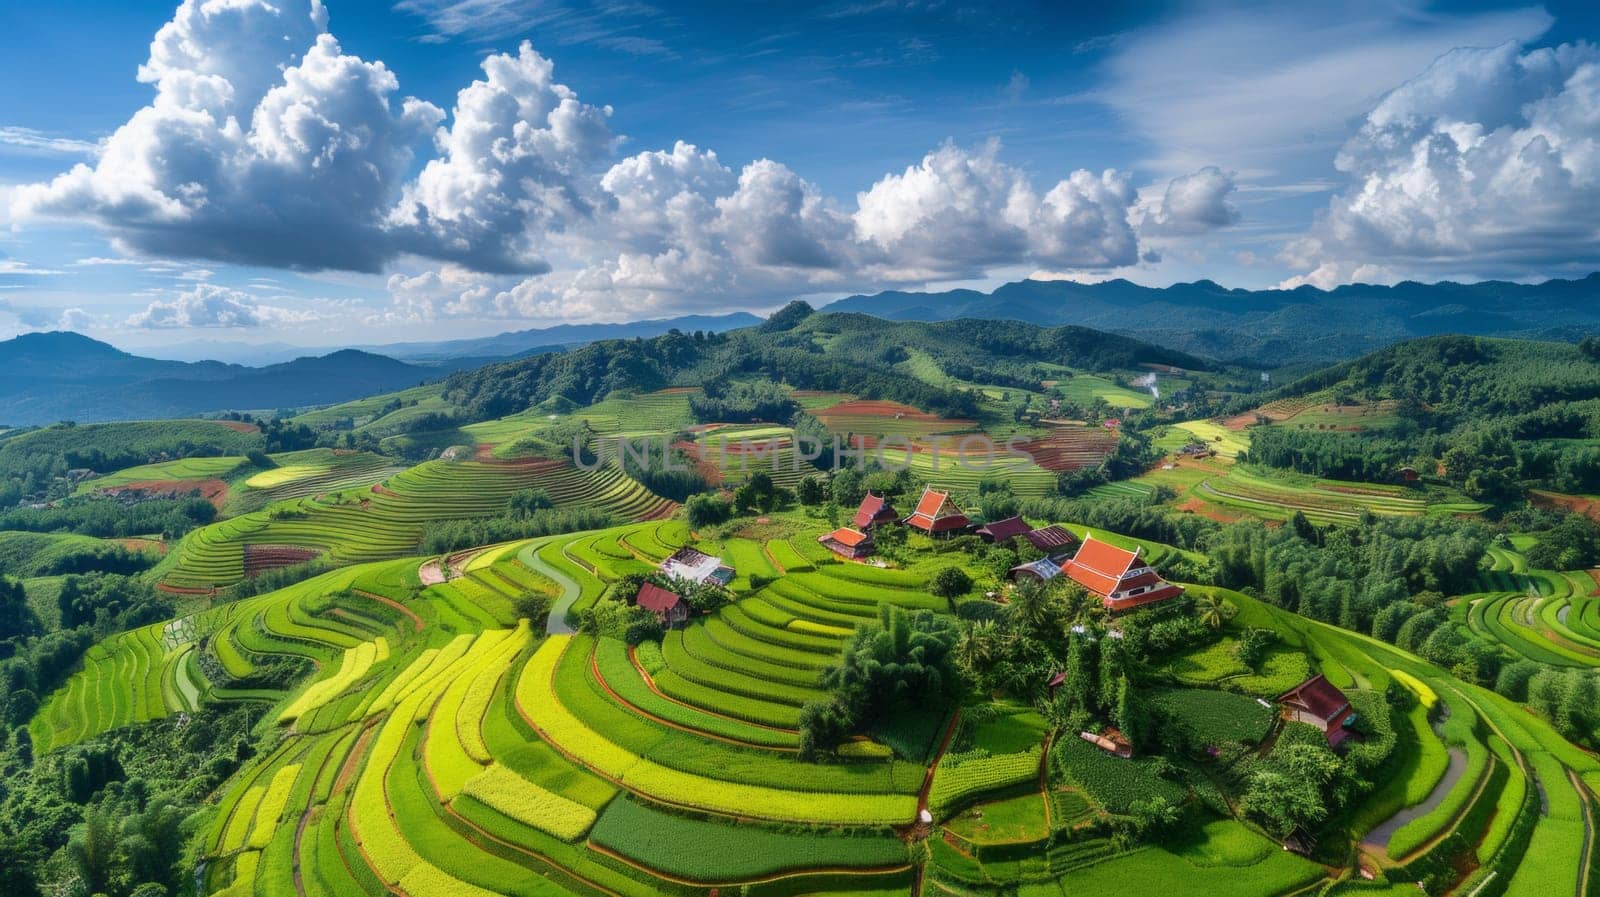 A view of a beautiful landscape with many green fields